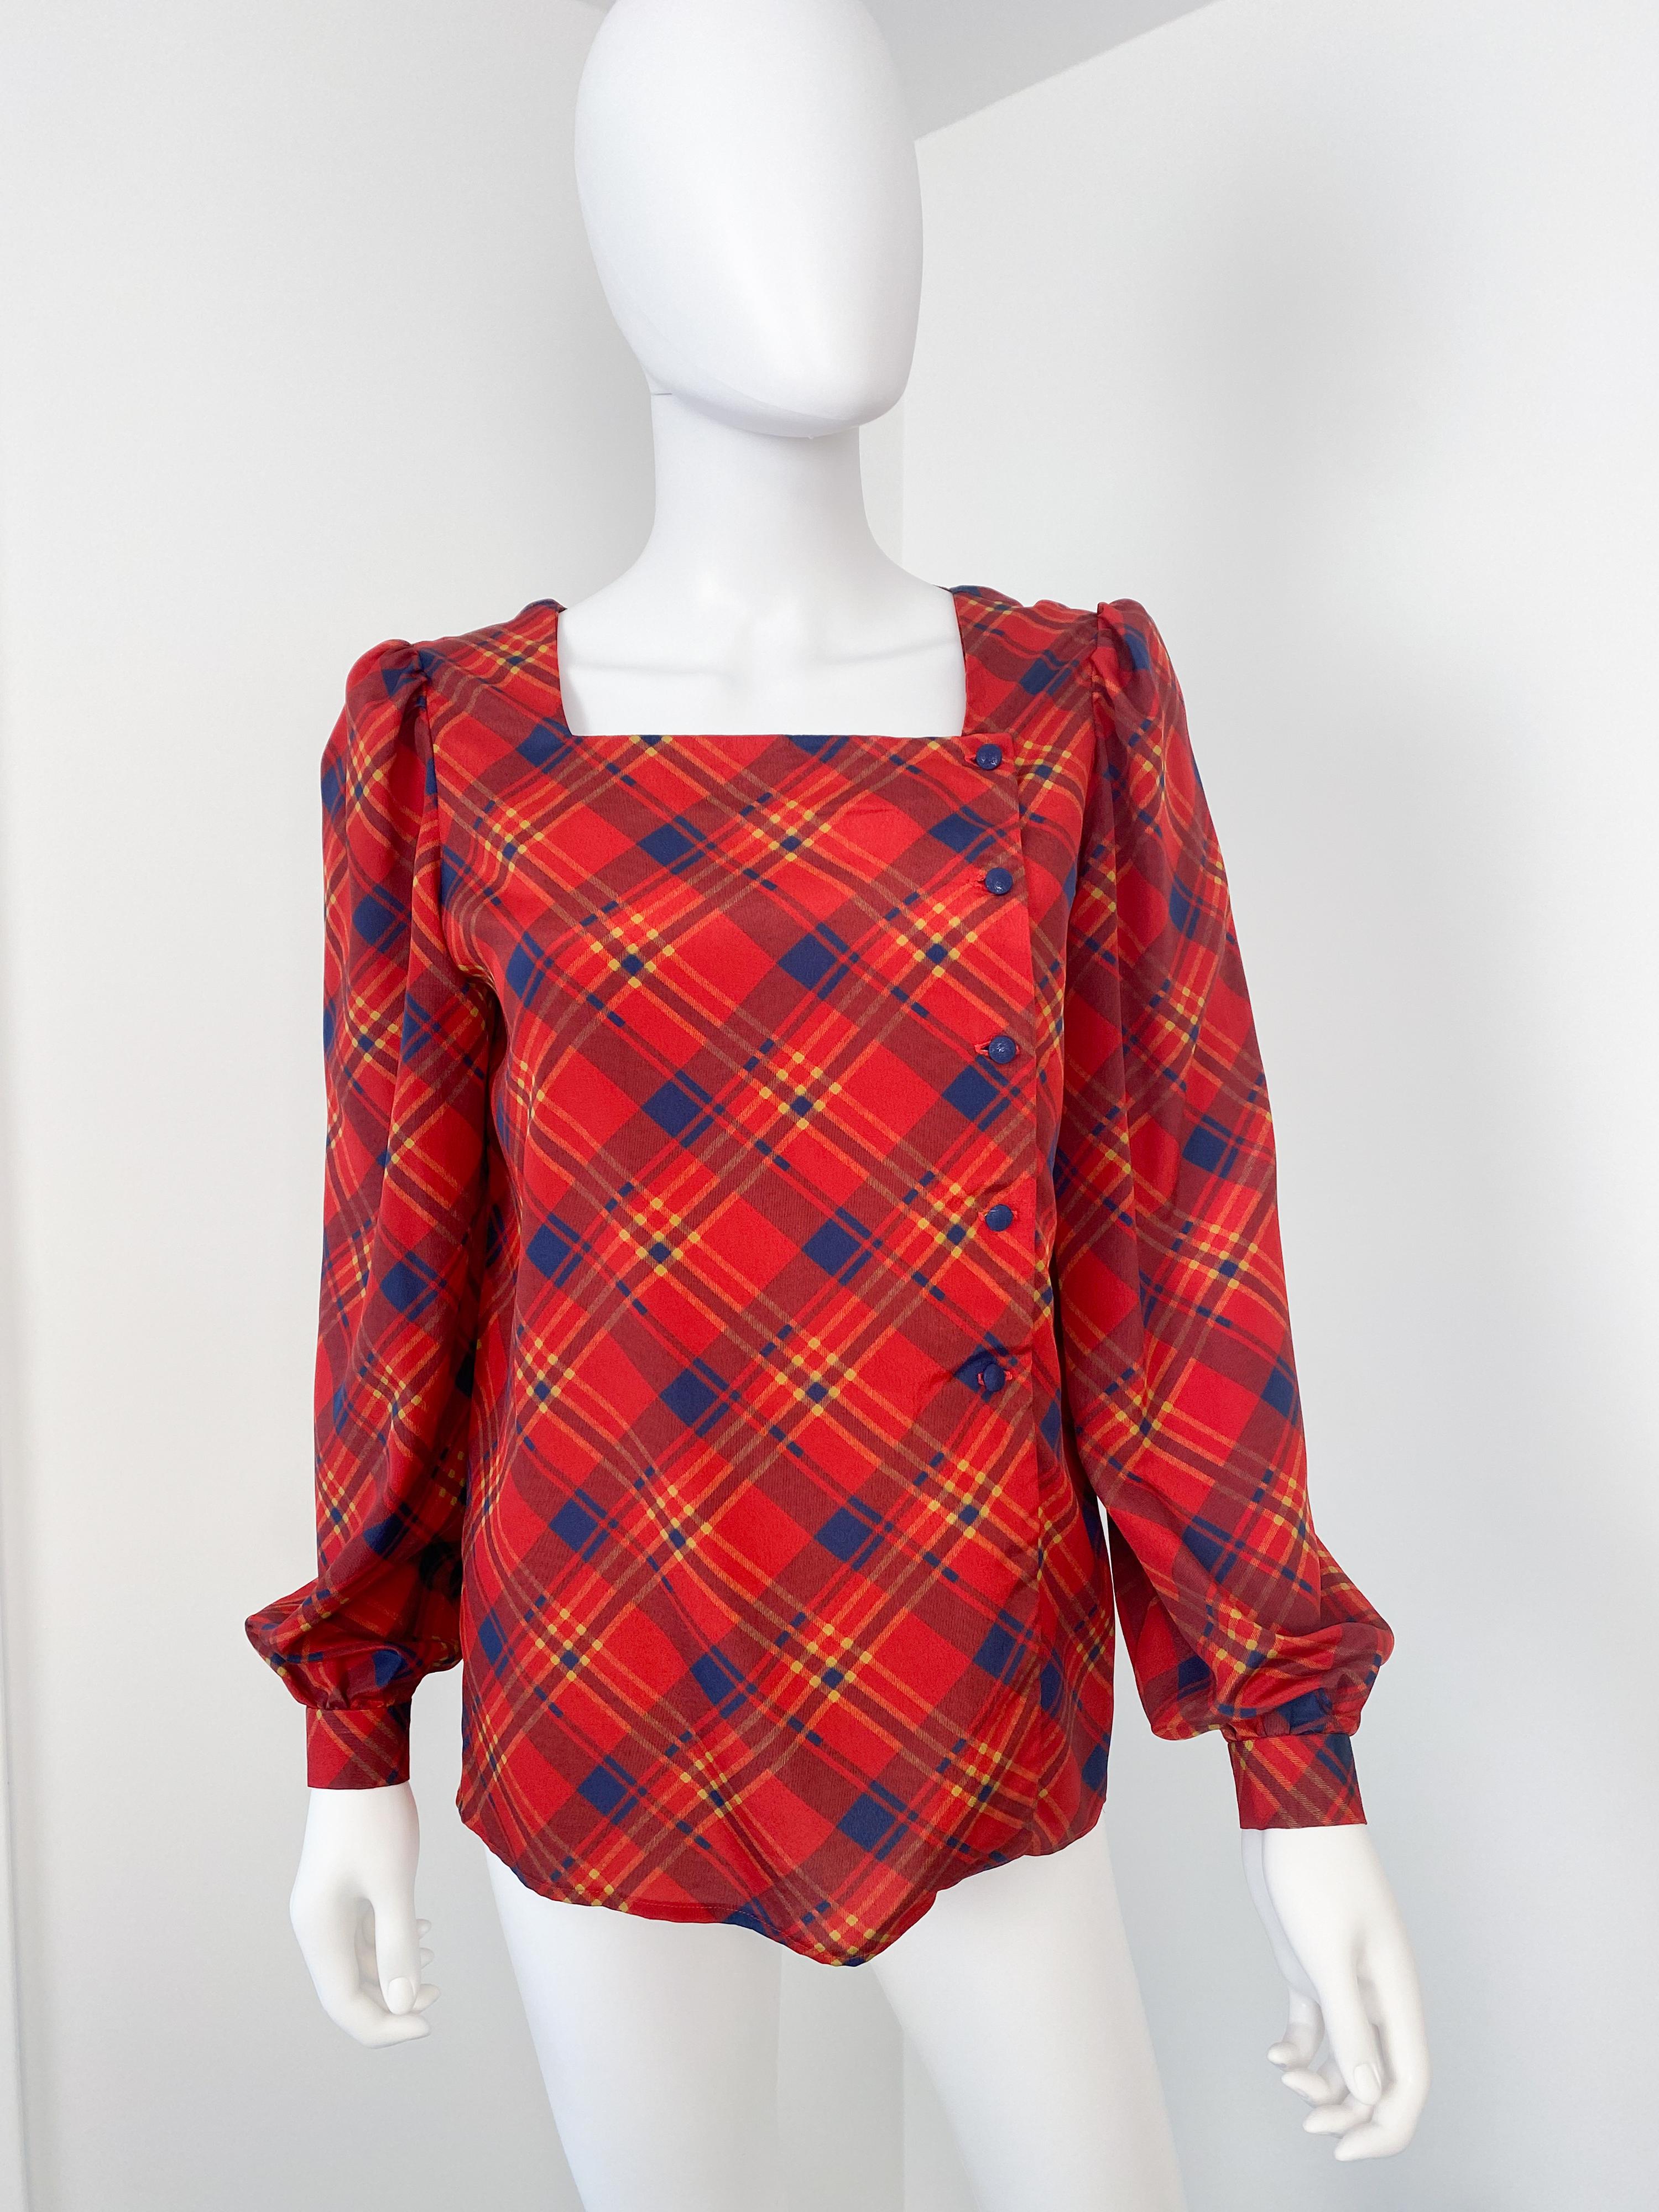 Women's or Men's Vintage 1980s Silky Polyester Blouse Top Red and Blue Tartan Size 6/8 For Sale